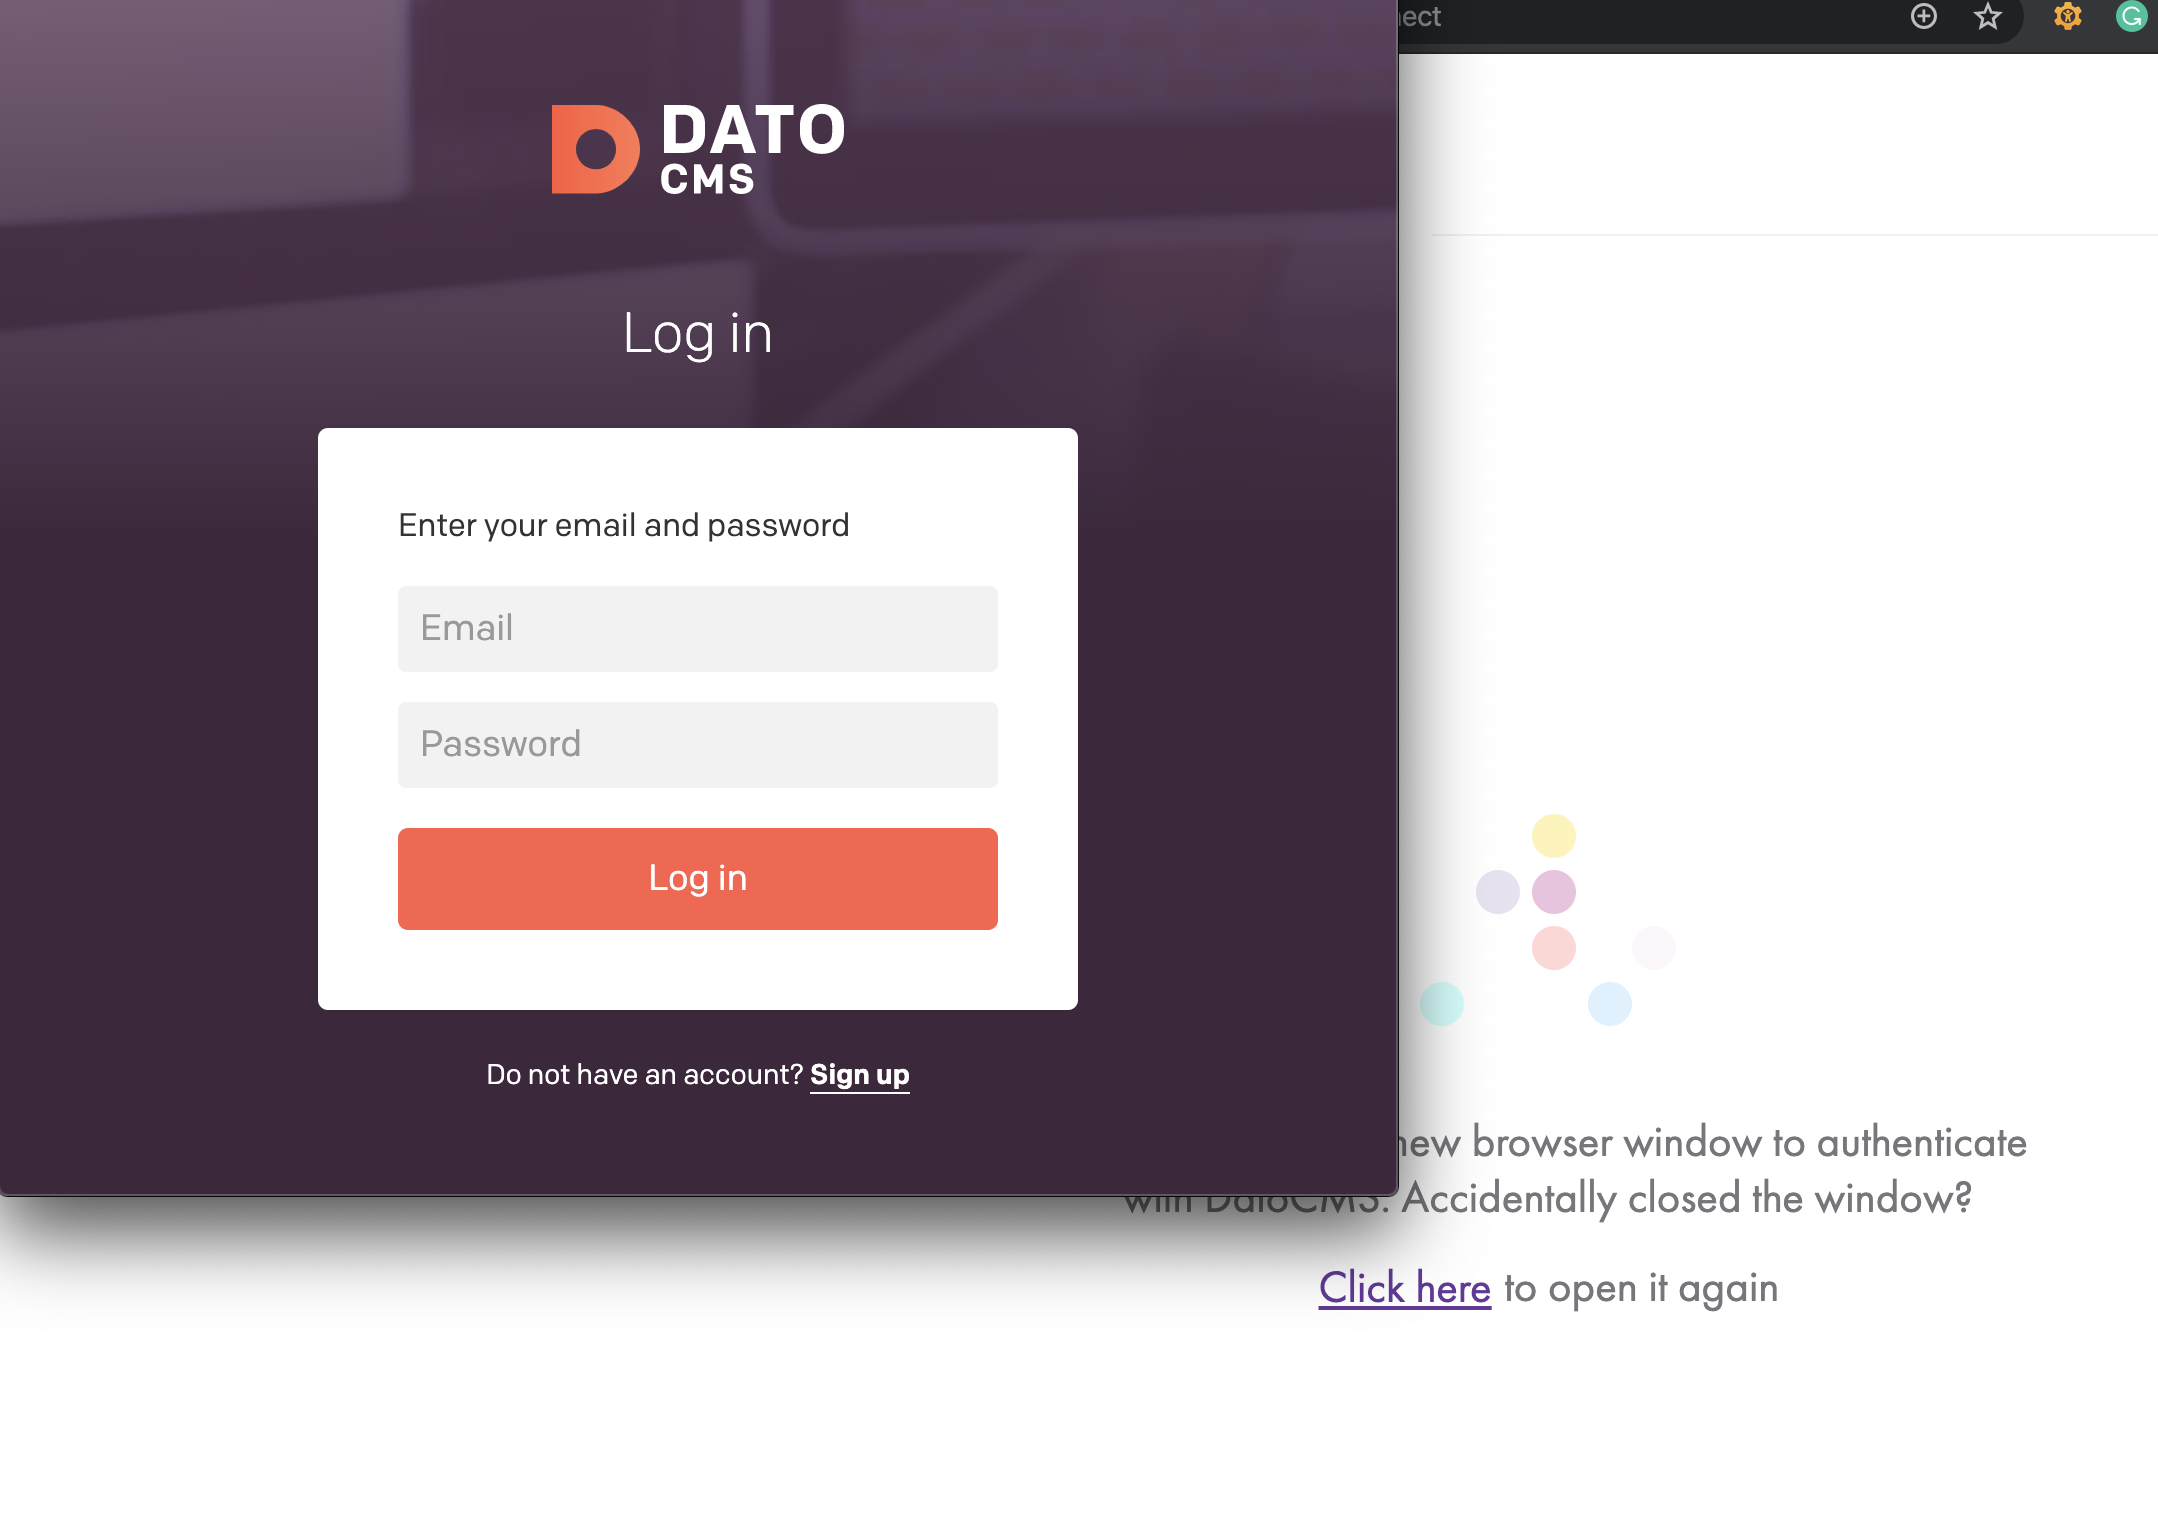 Log into DatoCMS overlaid on top of the Gatsby UI